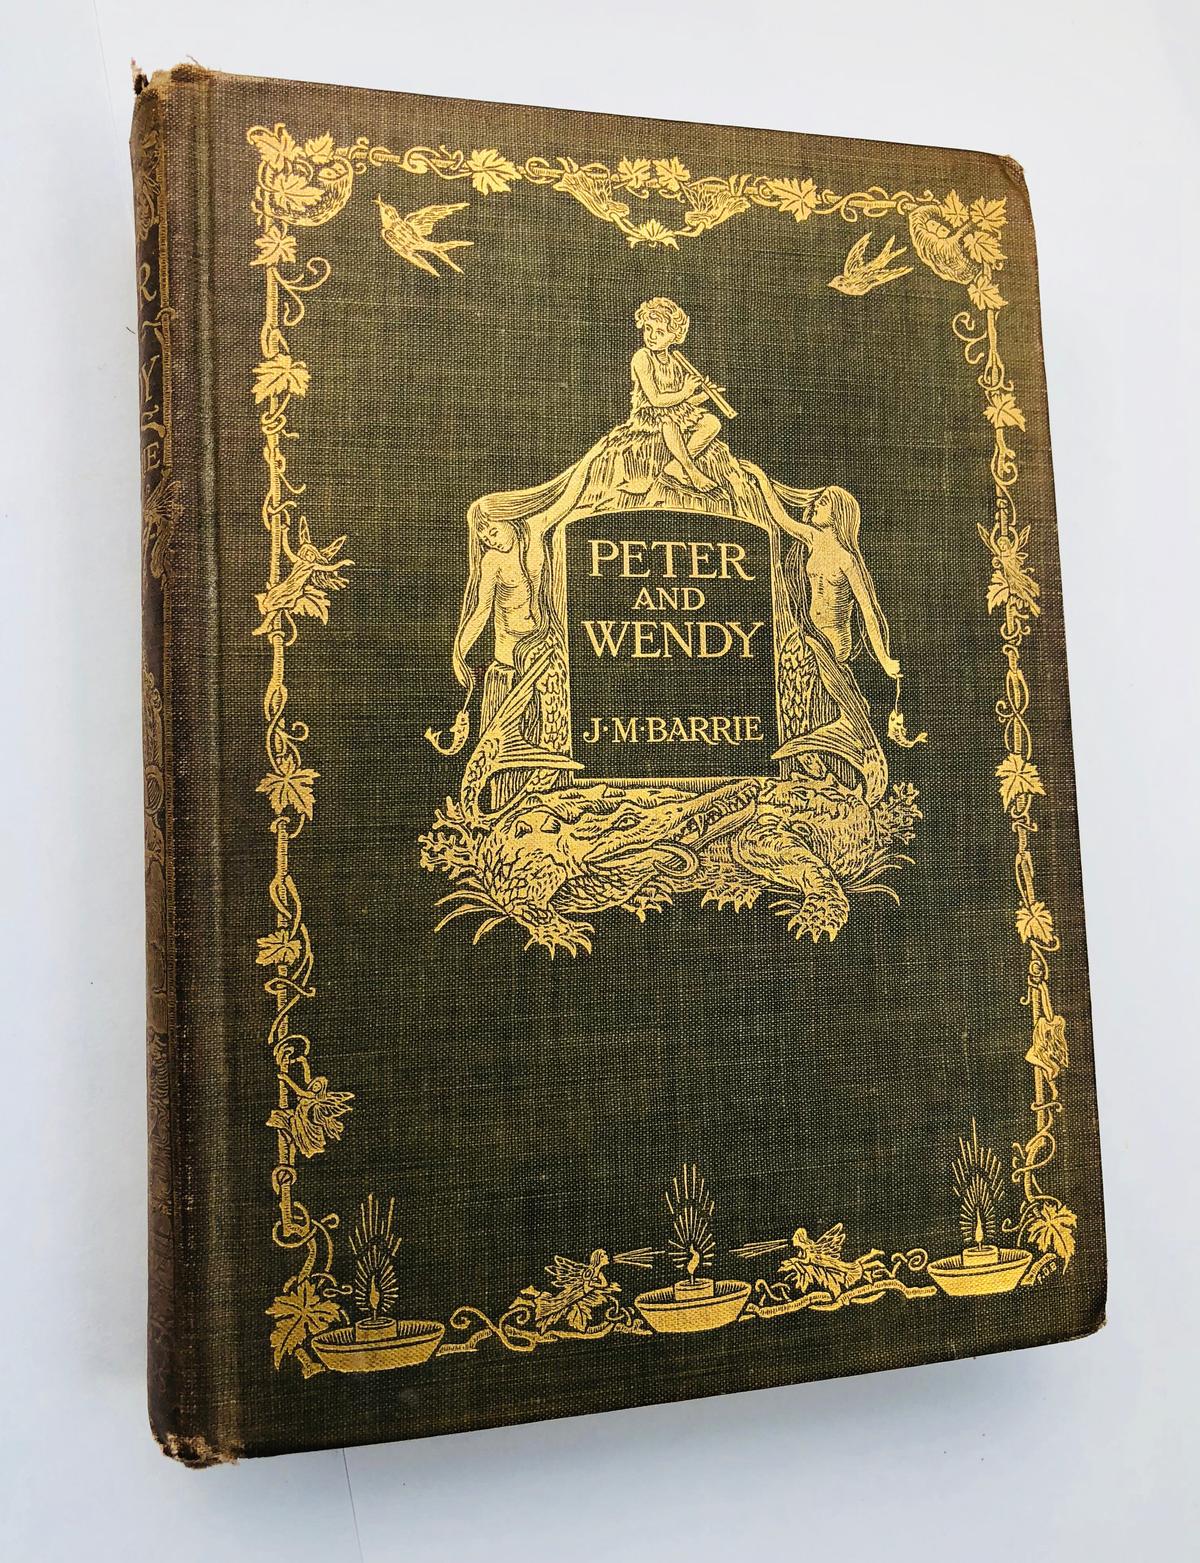 RAREST PETER & WENDY (1911) FIRST US EDITION - FIRST PRINTING